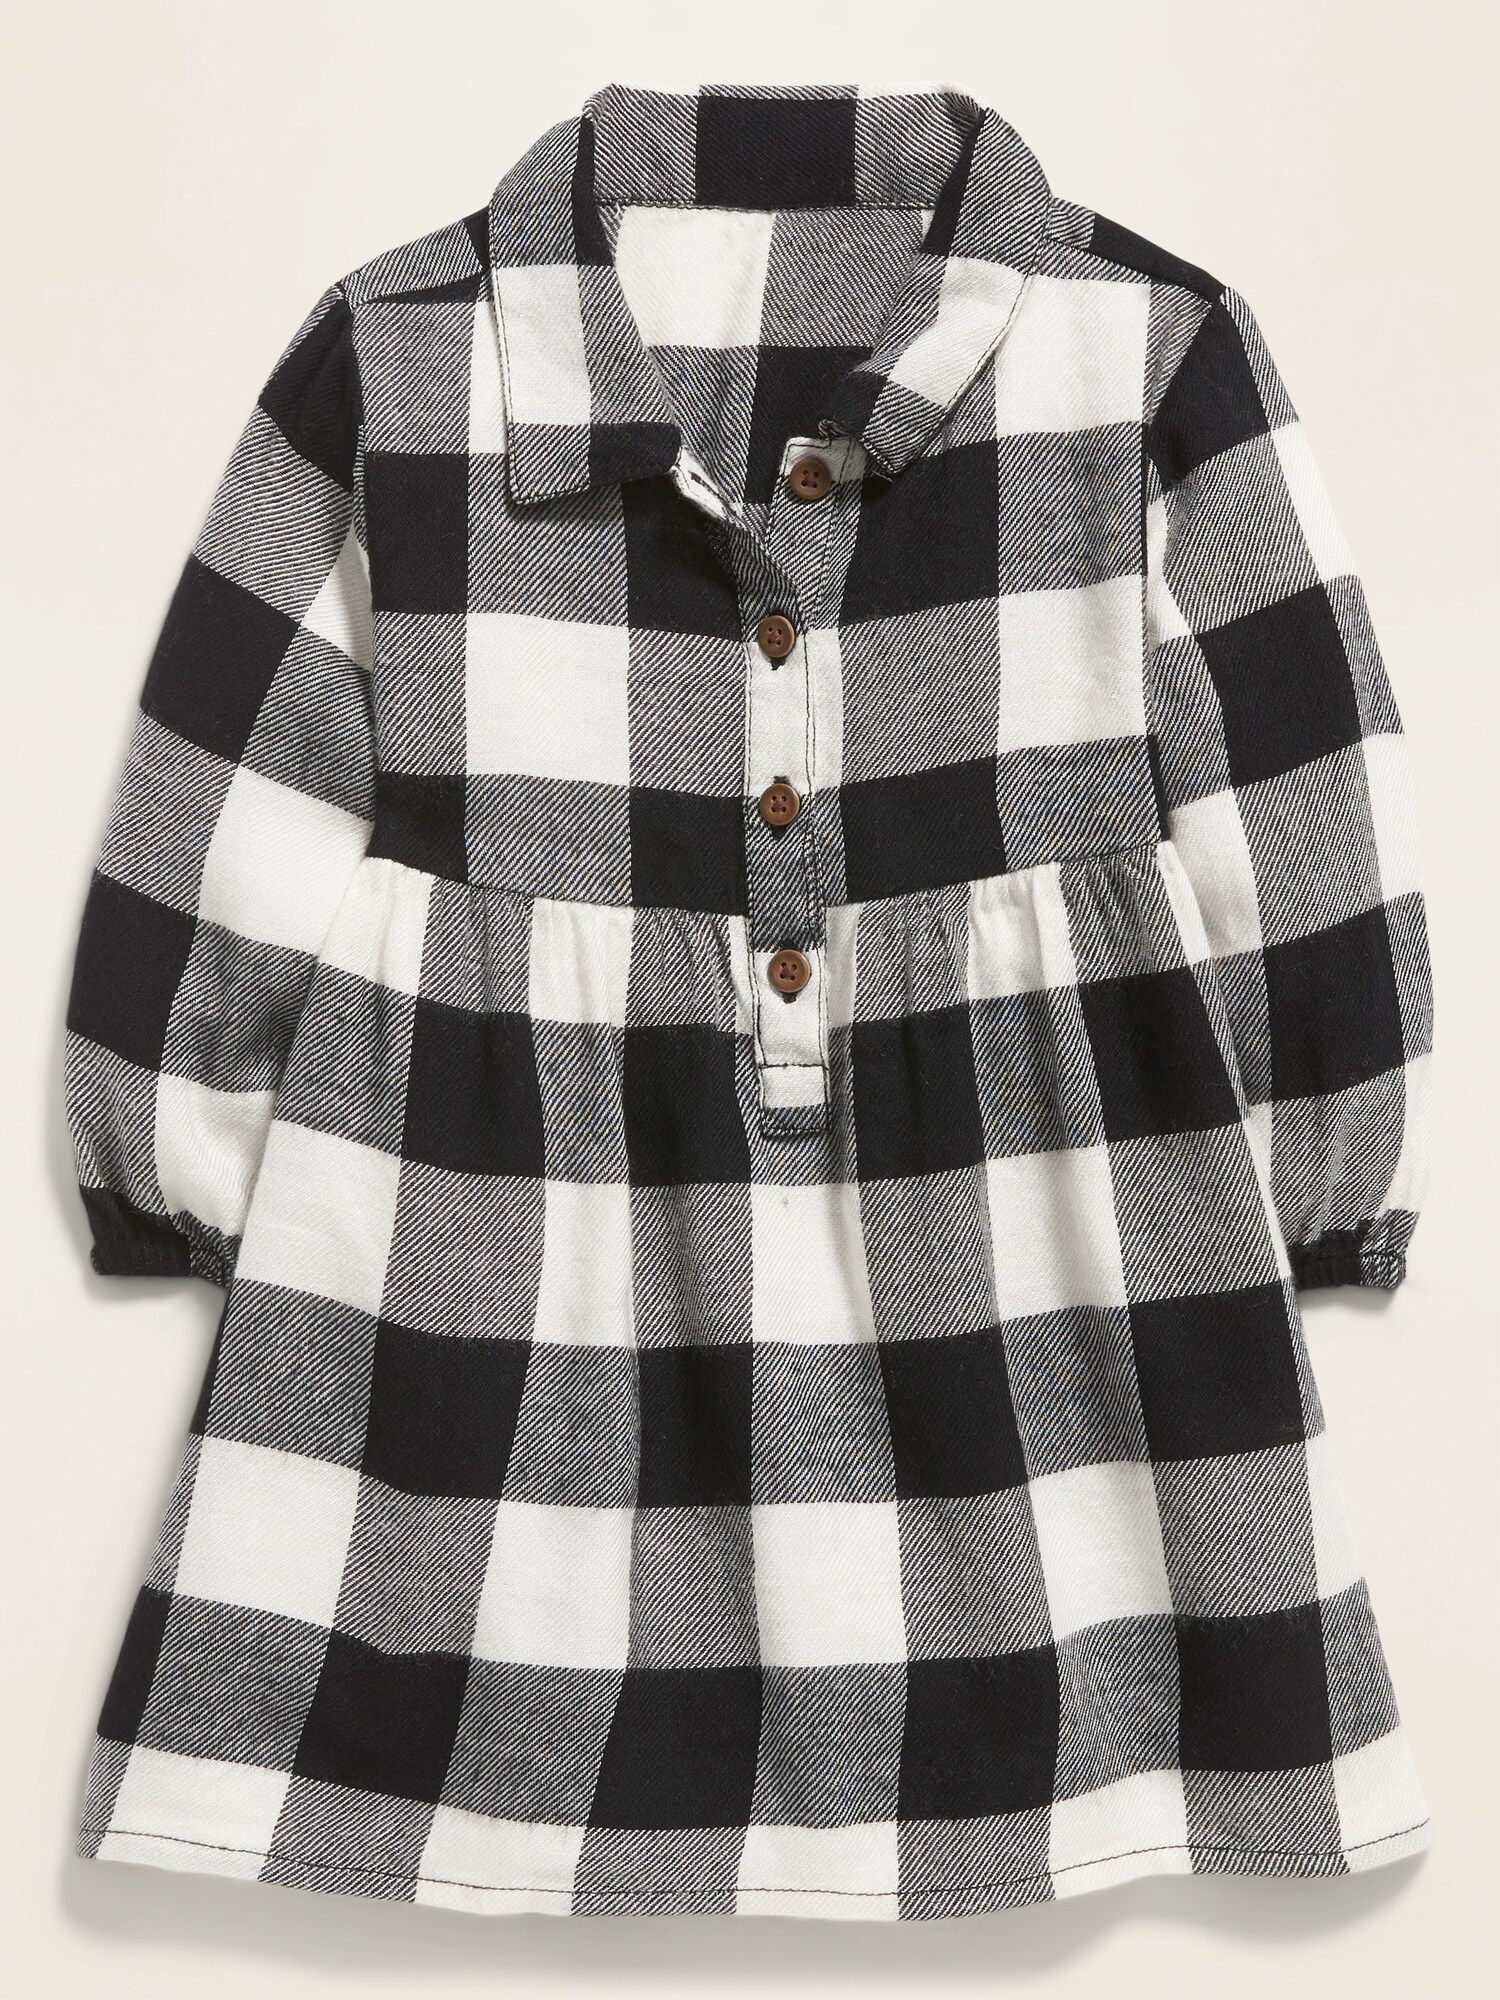 old navy flannel dress